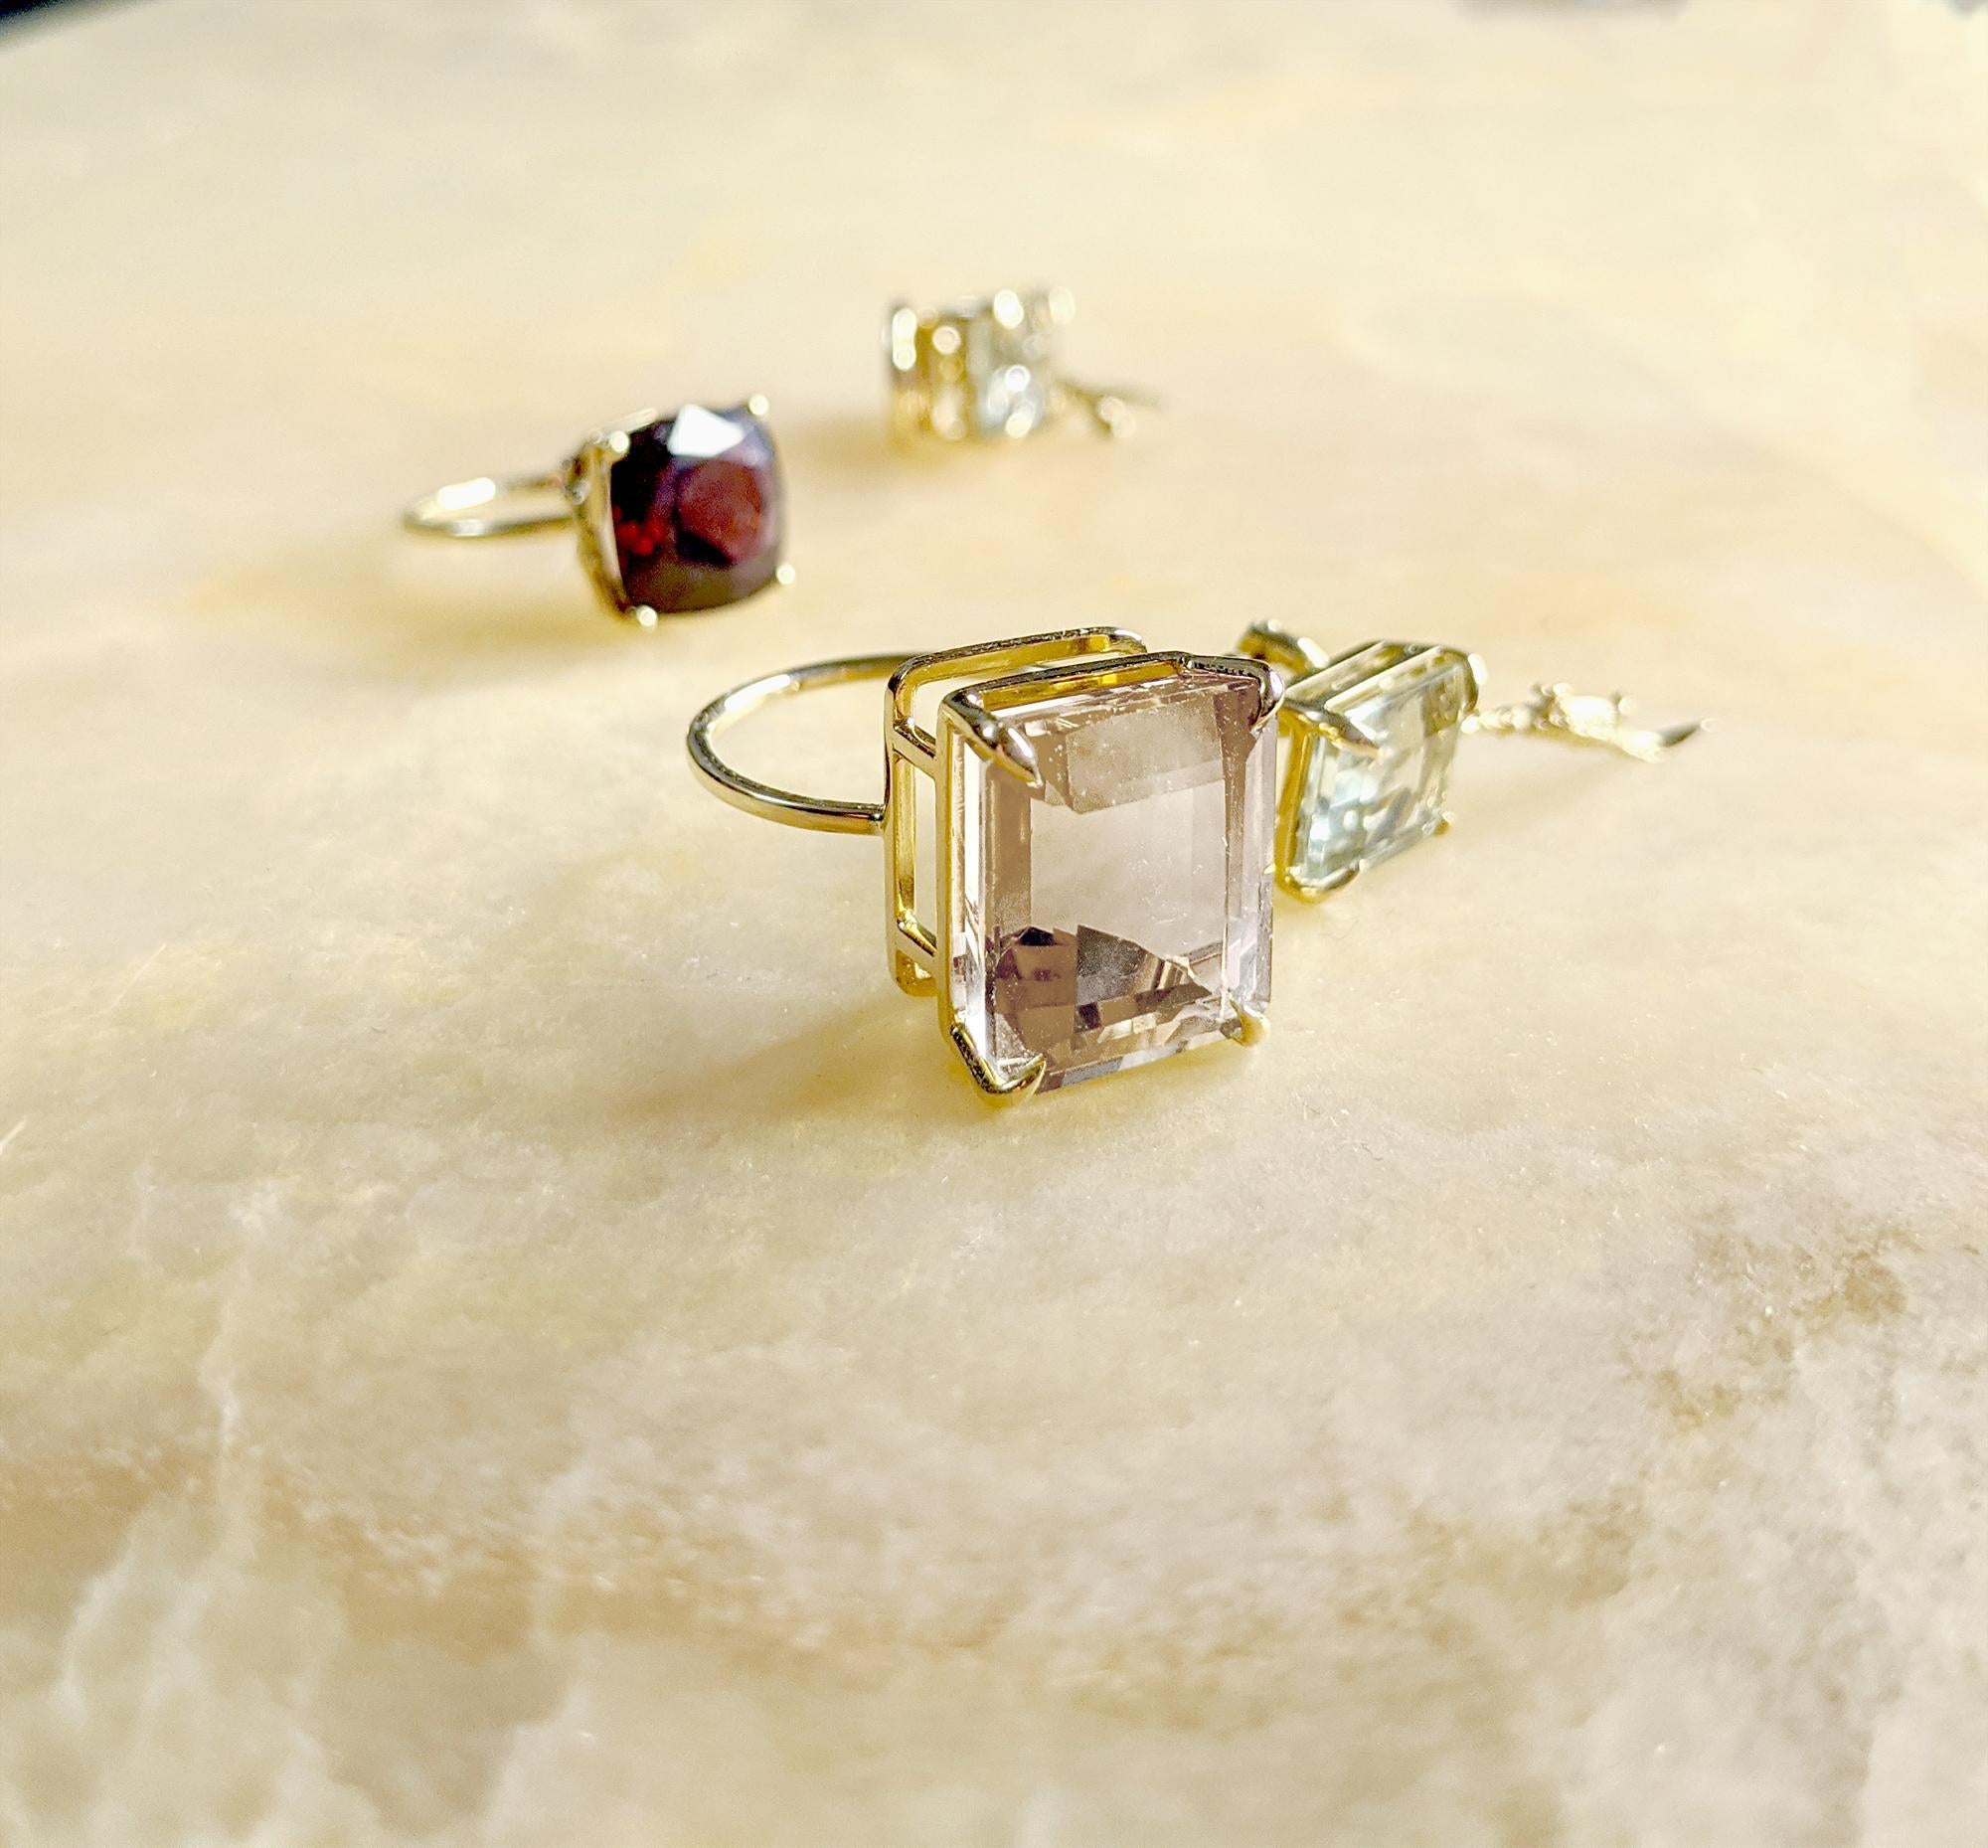 This cocktail ring features a light rose morganite gem set in 18 karat yellow gold. The exquisite workmanship of the tiny prongs draws attention to the gem's delicate and tender tone.

This ring can be customized to any size and can also be ordered